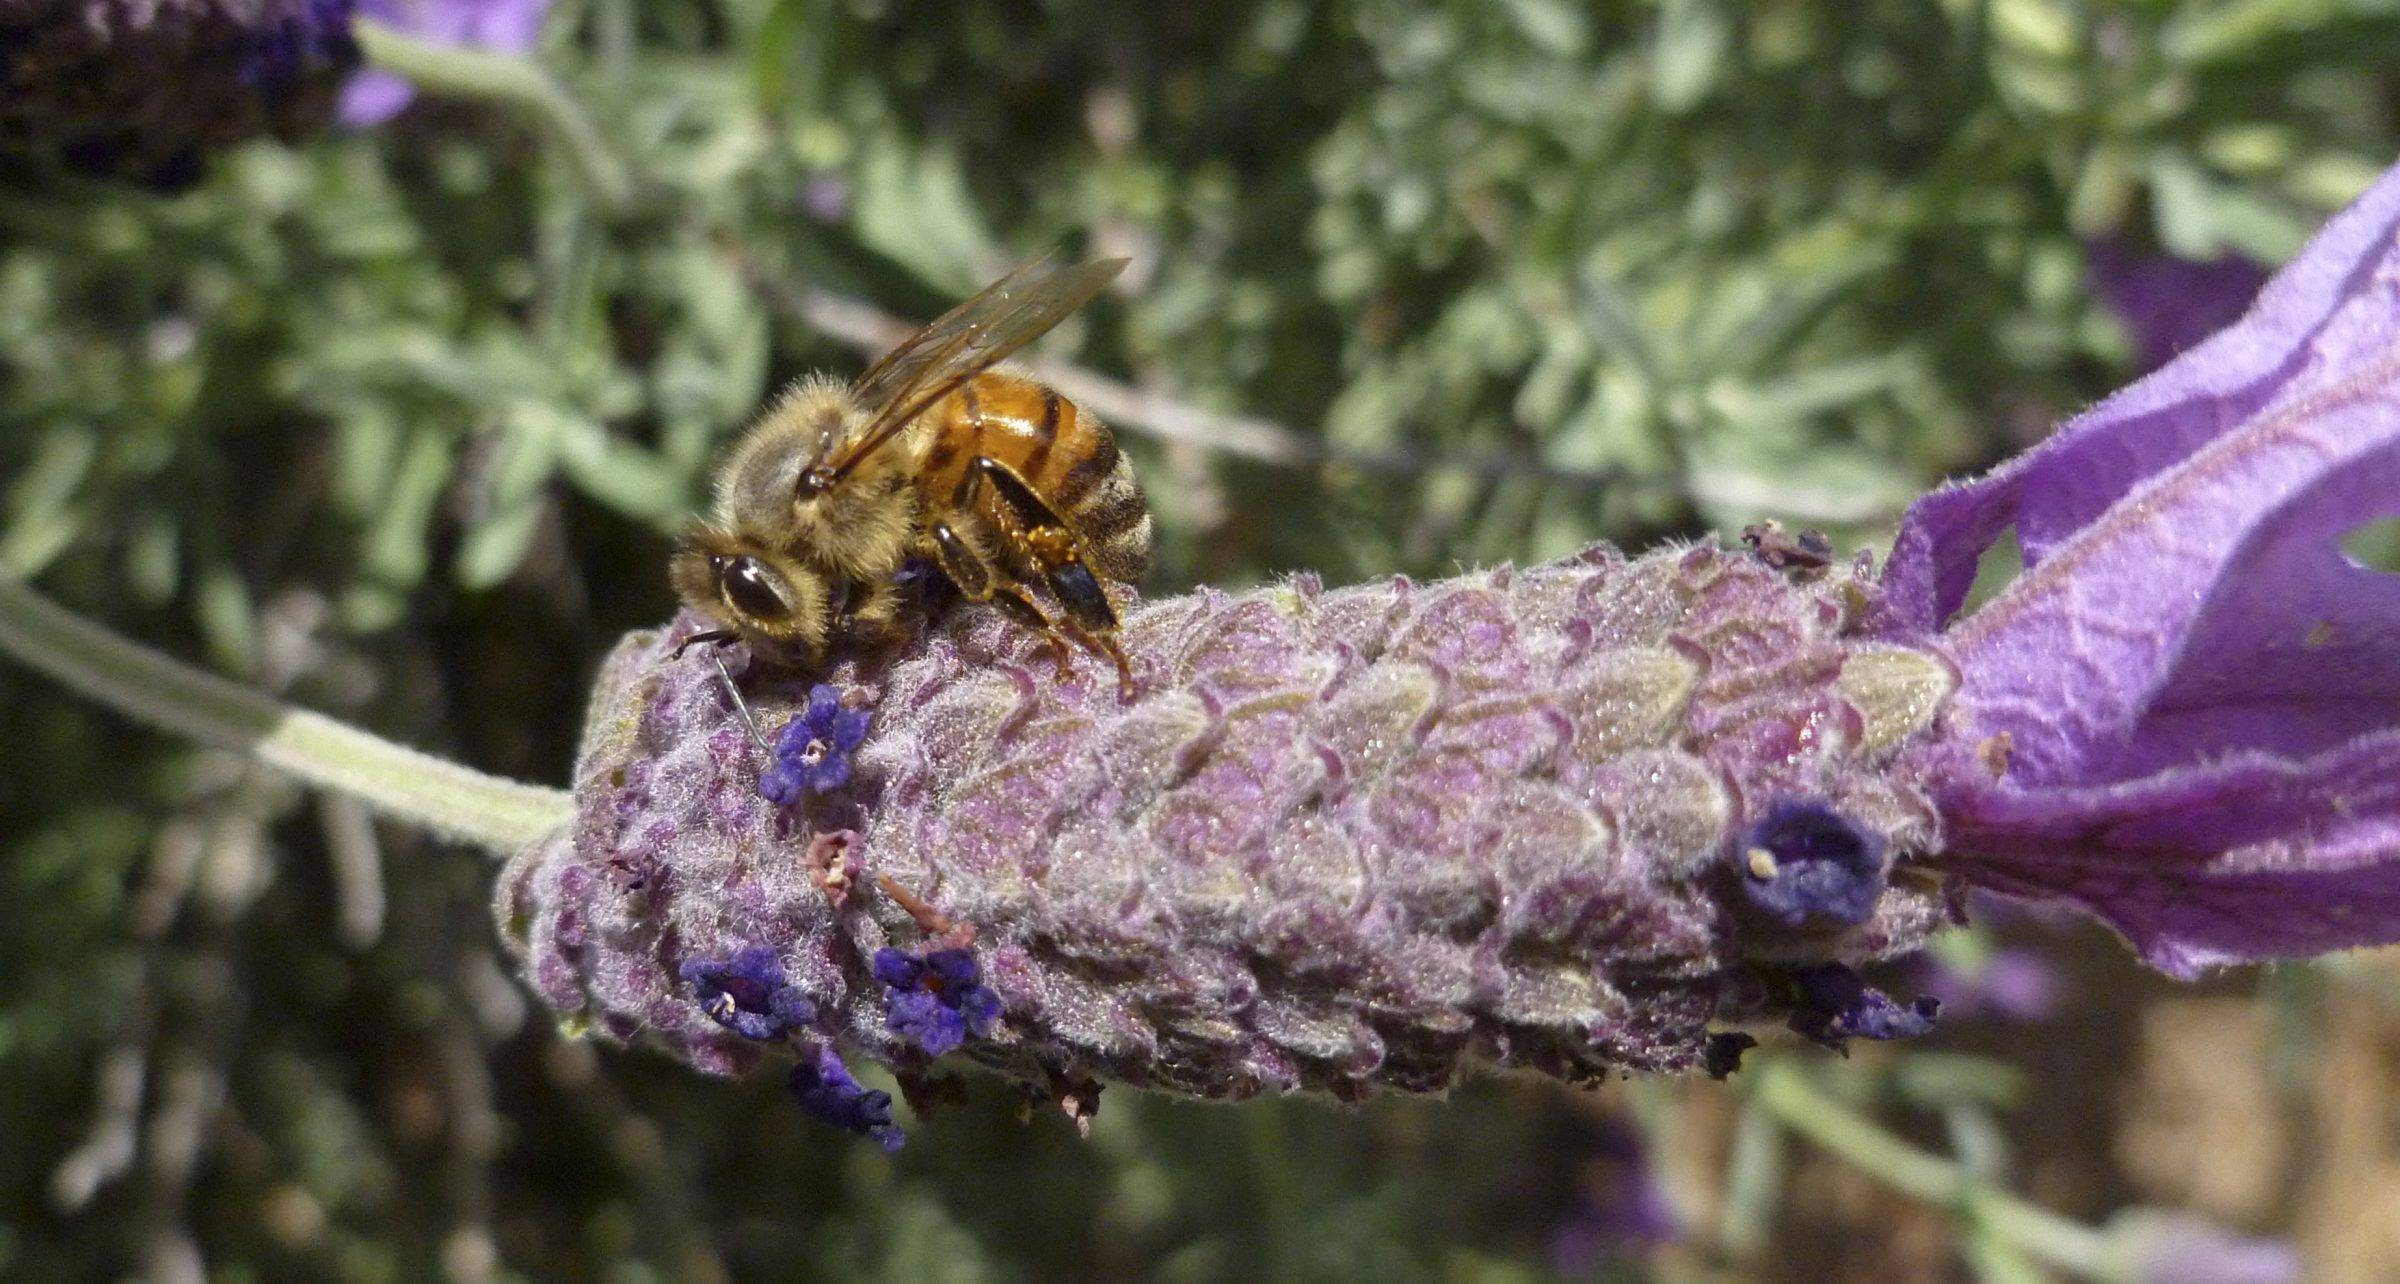 Honeybees, What Are They Good For?